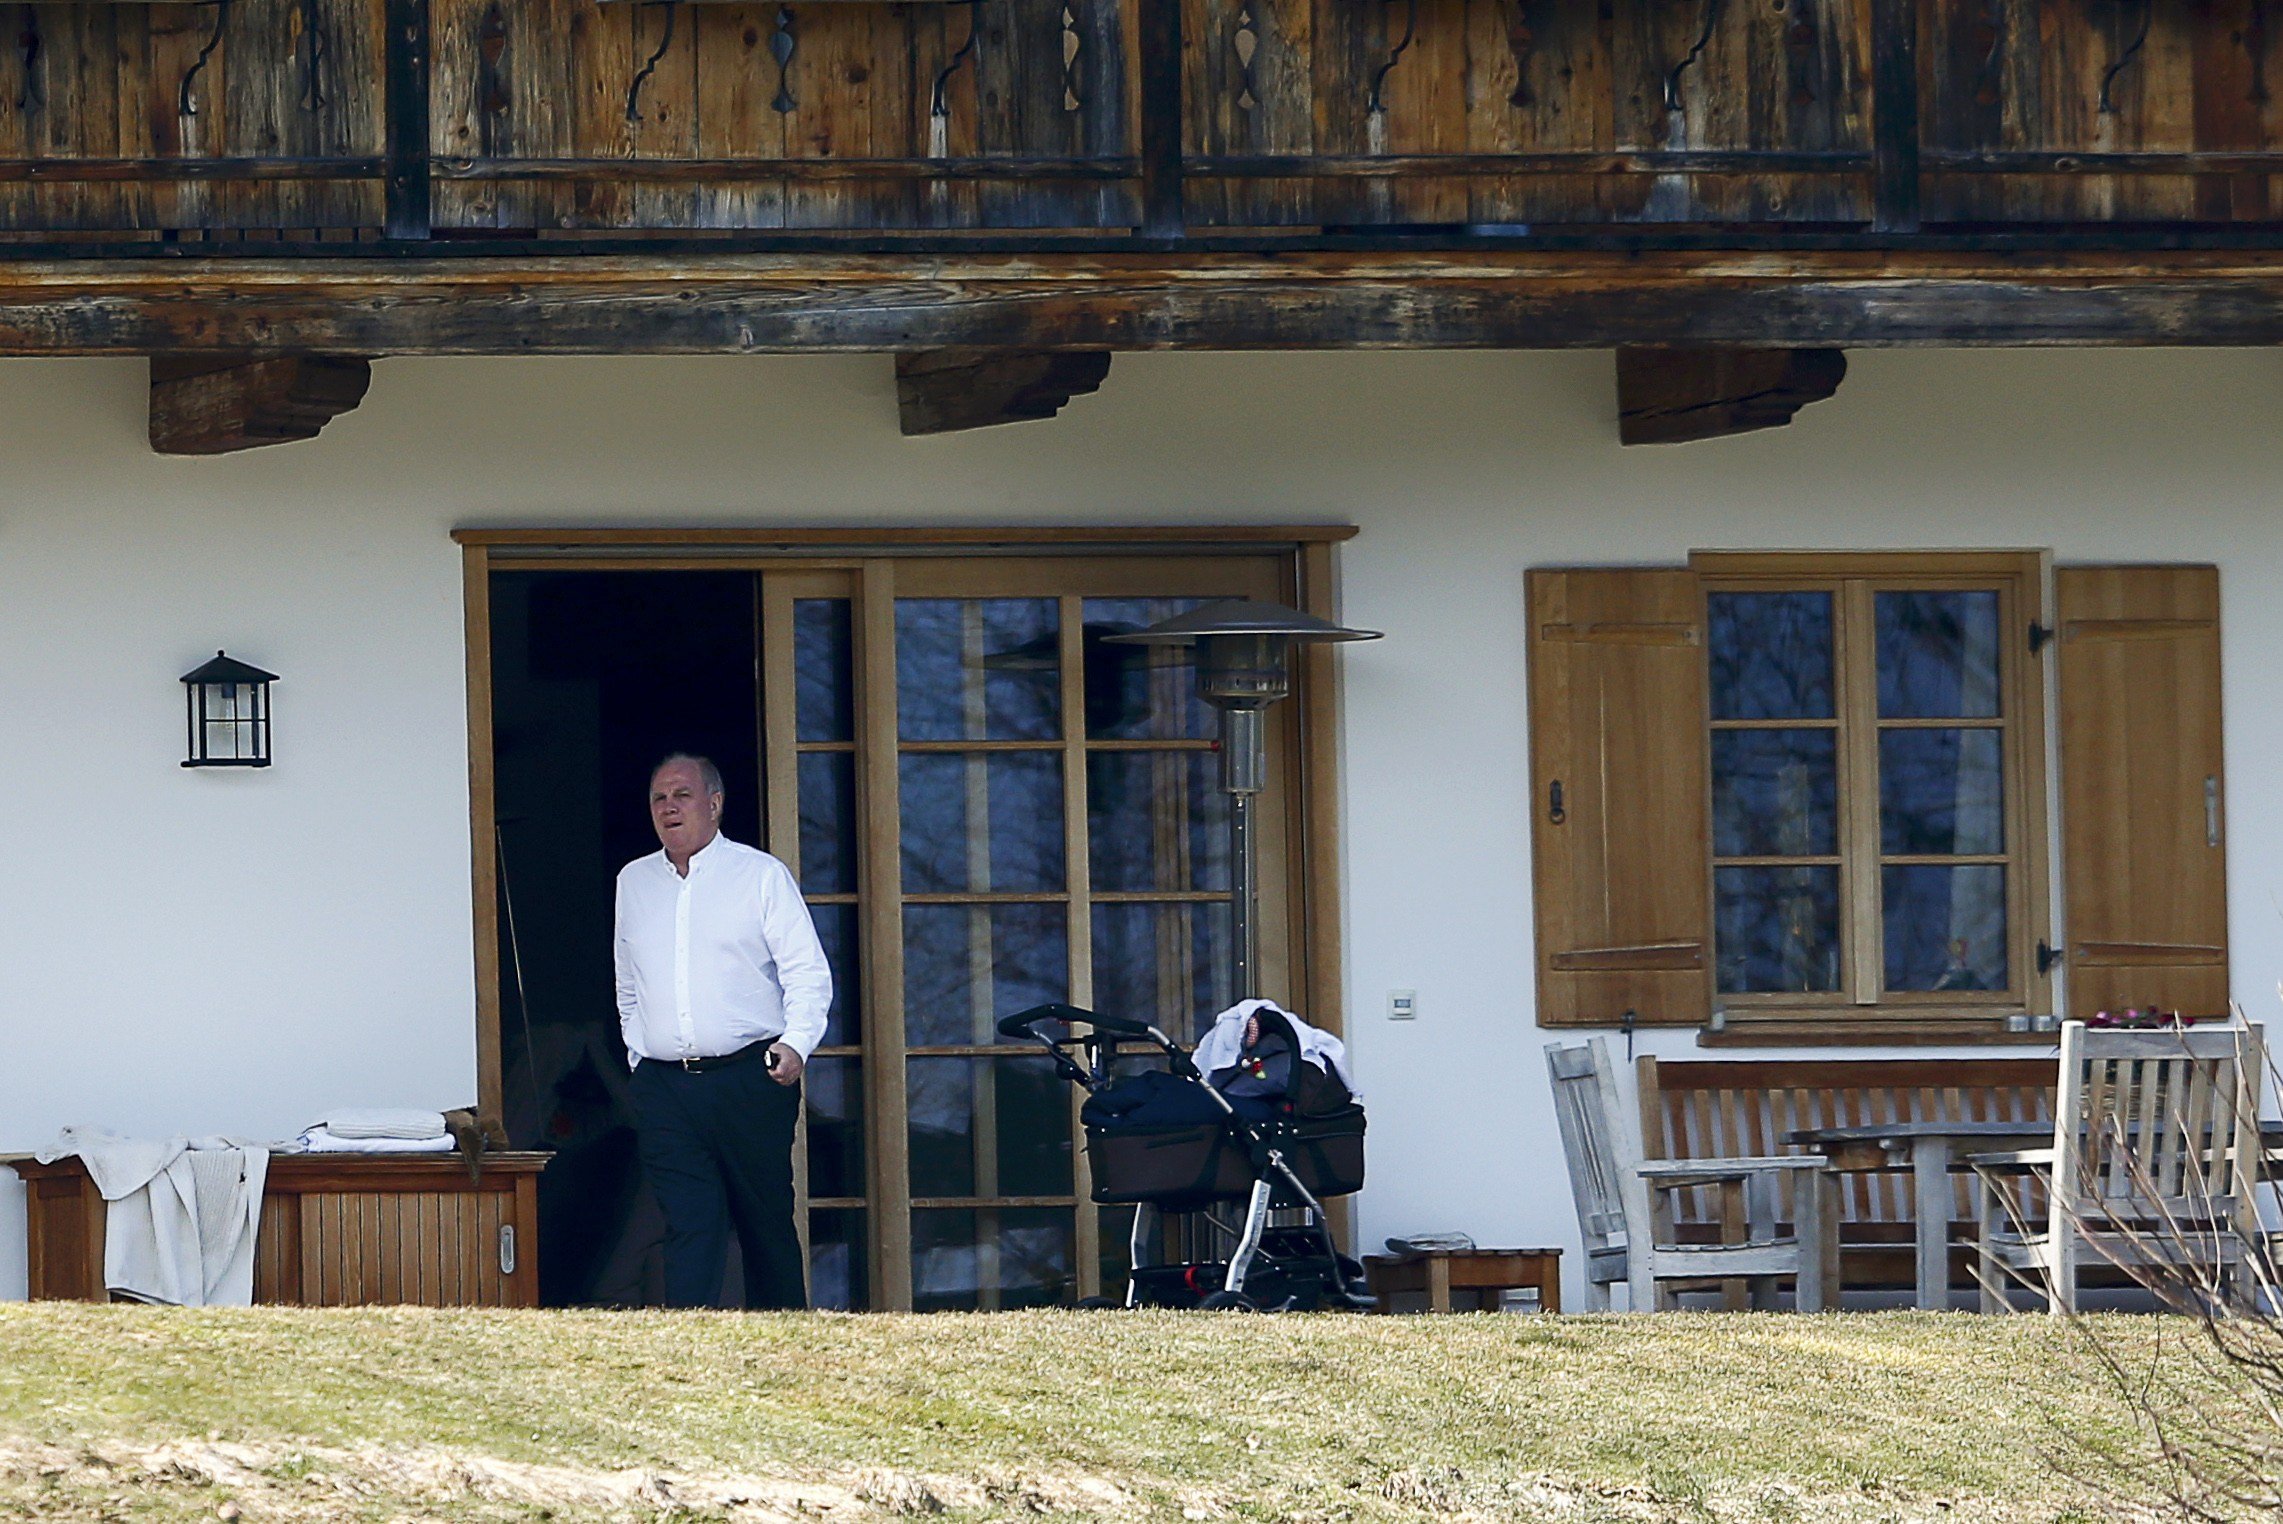 Uli Hoeness, who has resigned as president and chairman of Bayern Munich, outside his house in the Bavarian town of Bad Wiessee. Photo: Reuters 